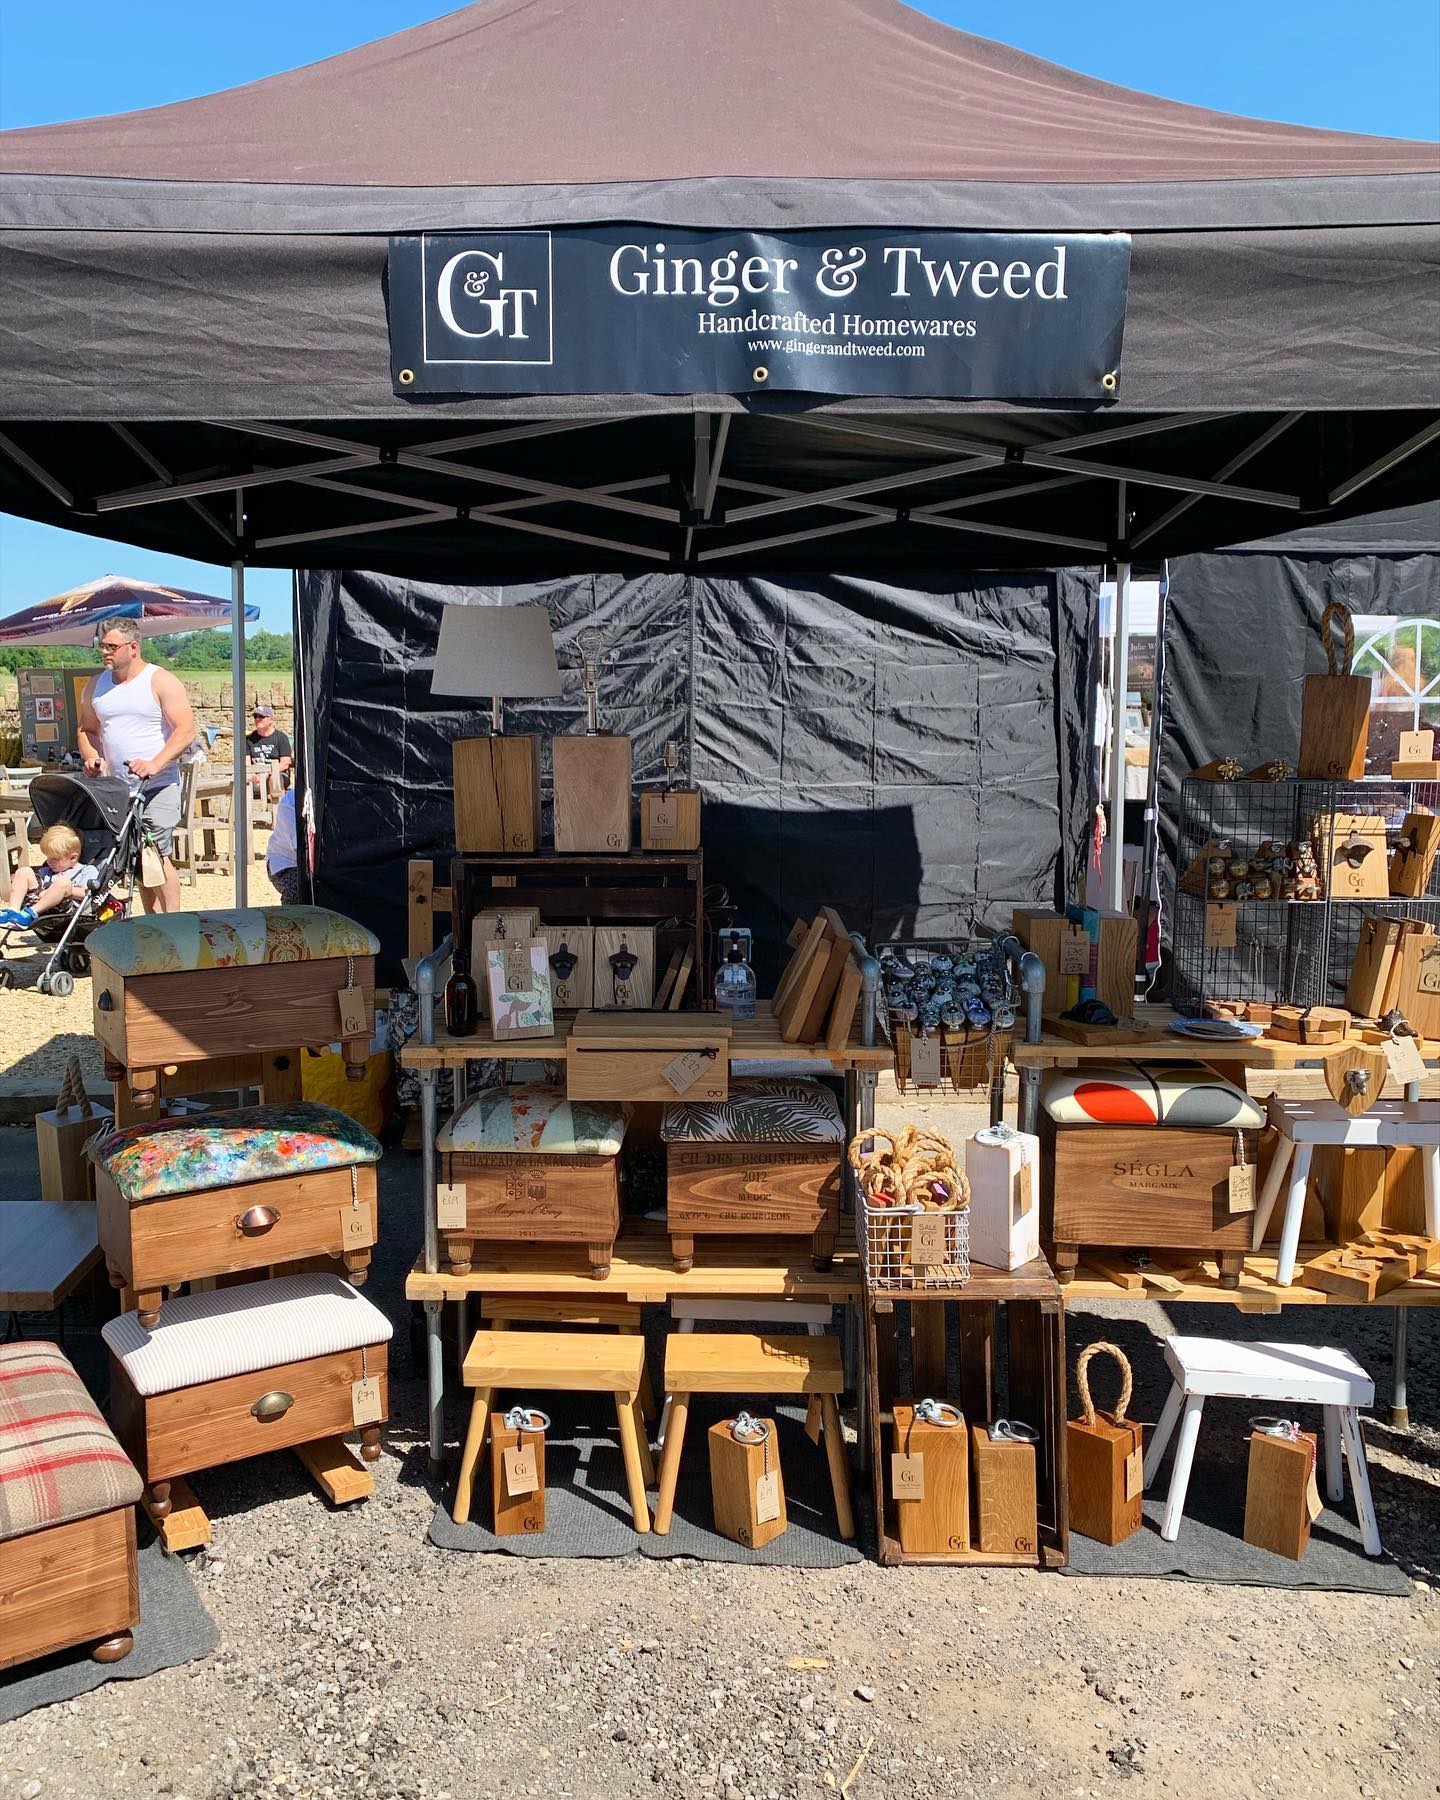 Lots of G ant T goodies here in Atworth today! And lots of wonderful stalls to browse. we also hear that the red arrows should be making an appearance around 1.40. ️